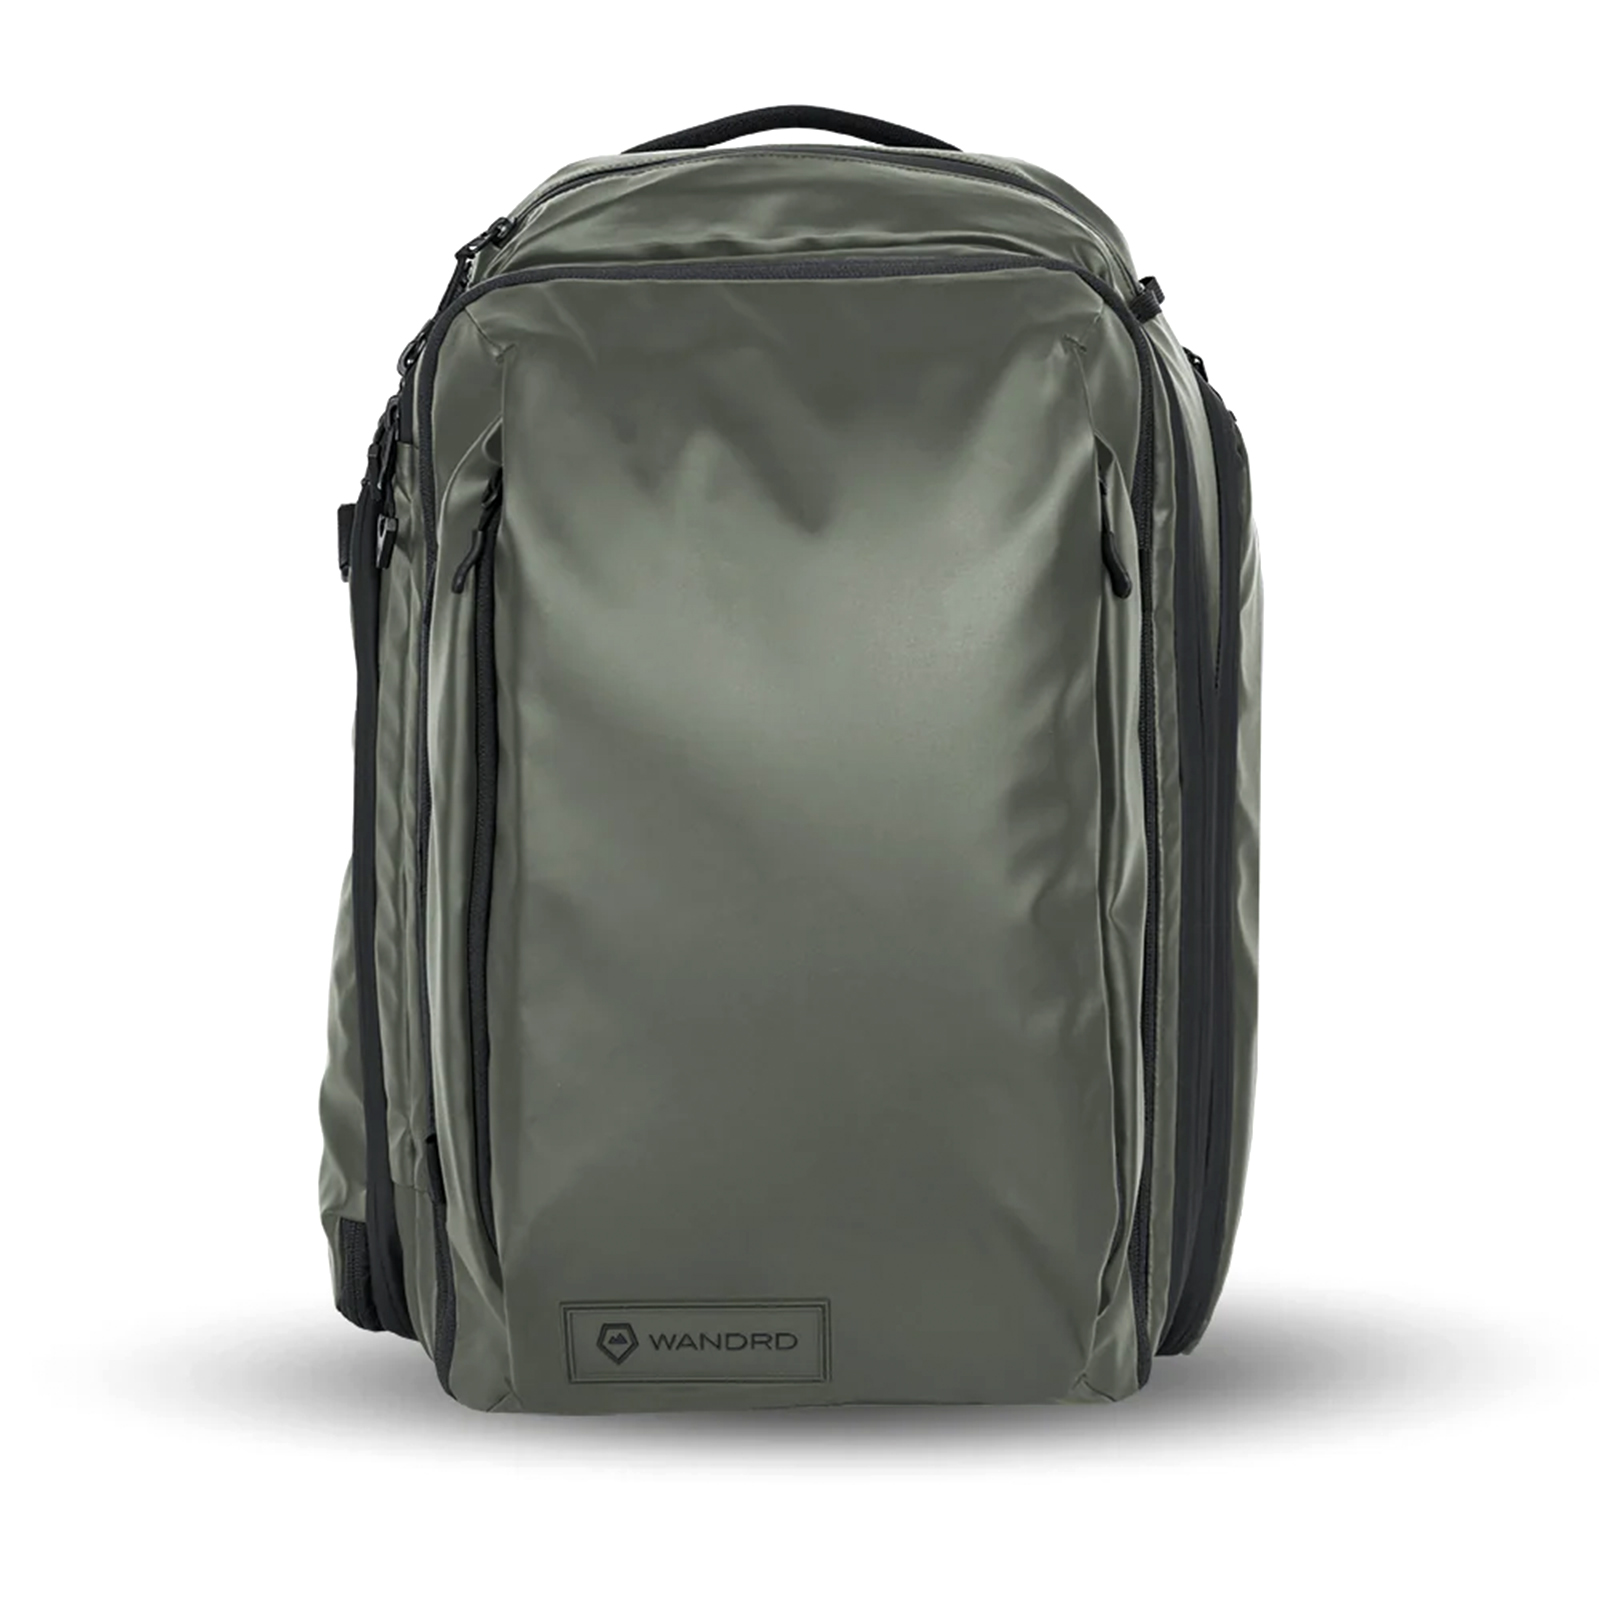 WANDRD Transit 45L Travel Backpack - Wasatch Green